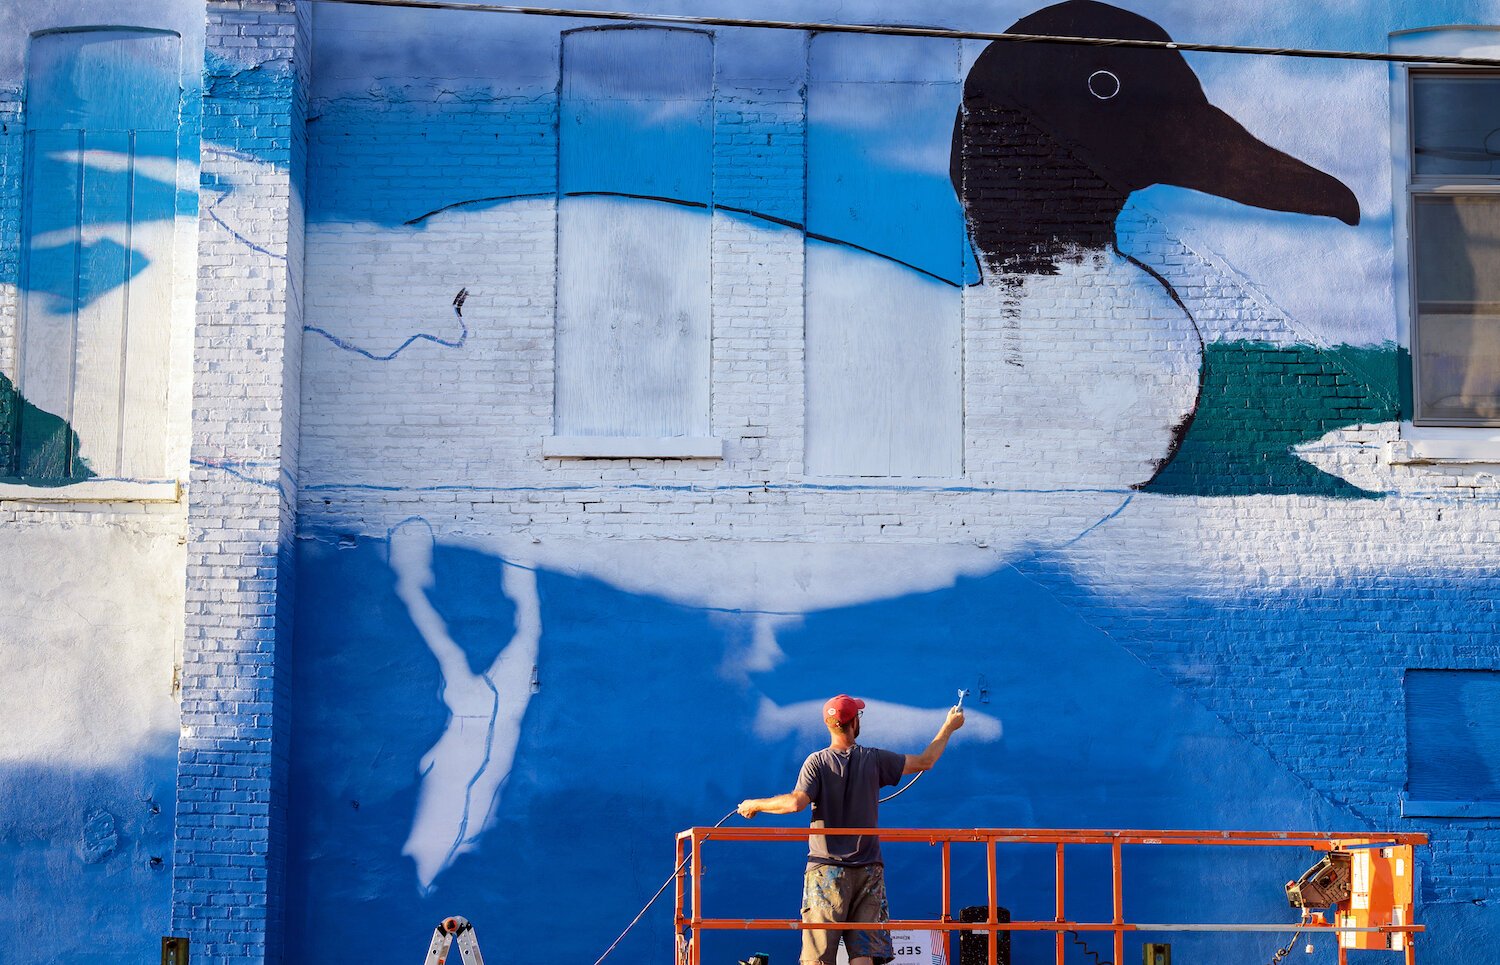 Parsley's mural features lake life and wildlife native to the Warsaw area.